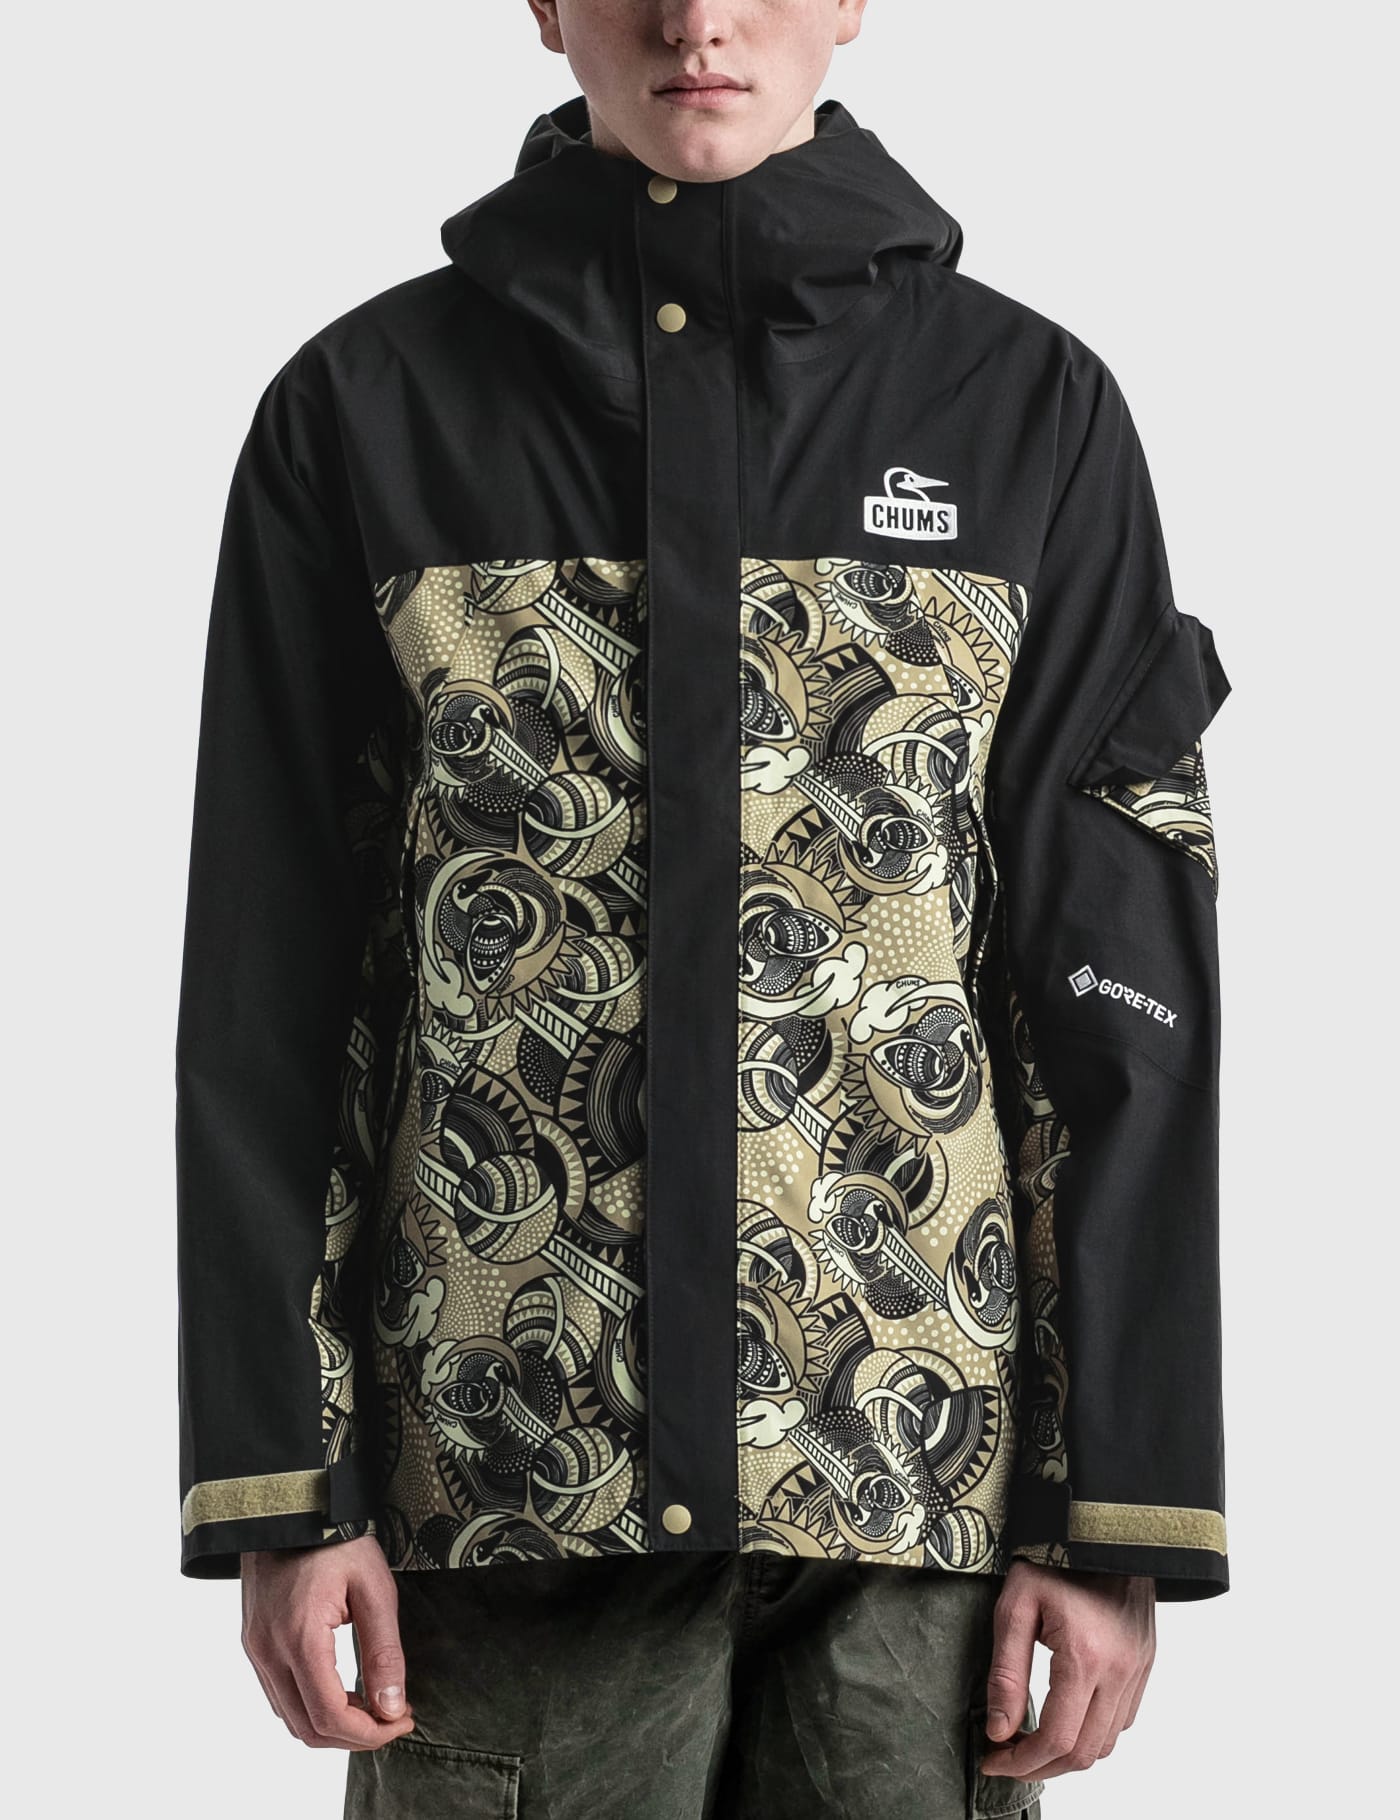 Chums - Spring Dale Gore-Tex Venture Jacket | HBX - Globally